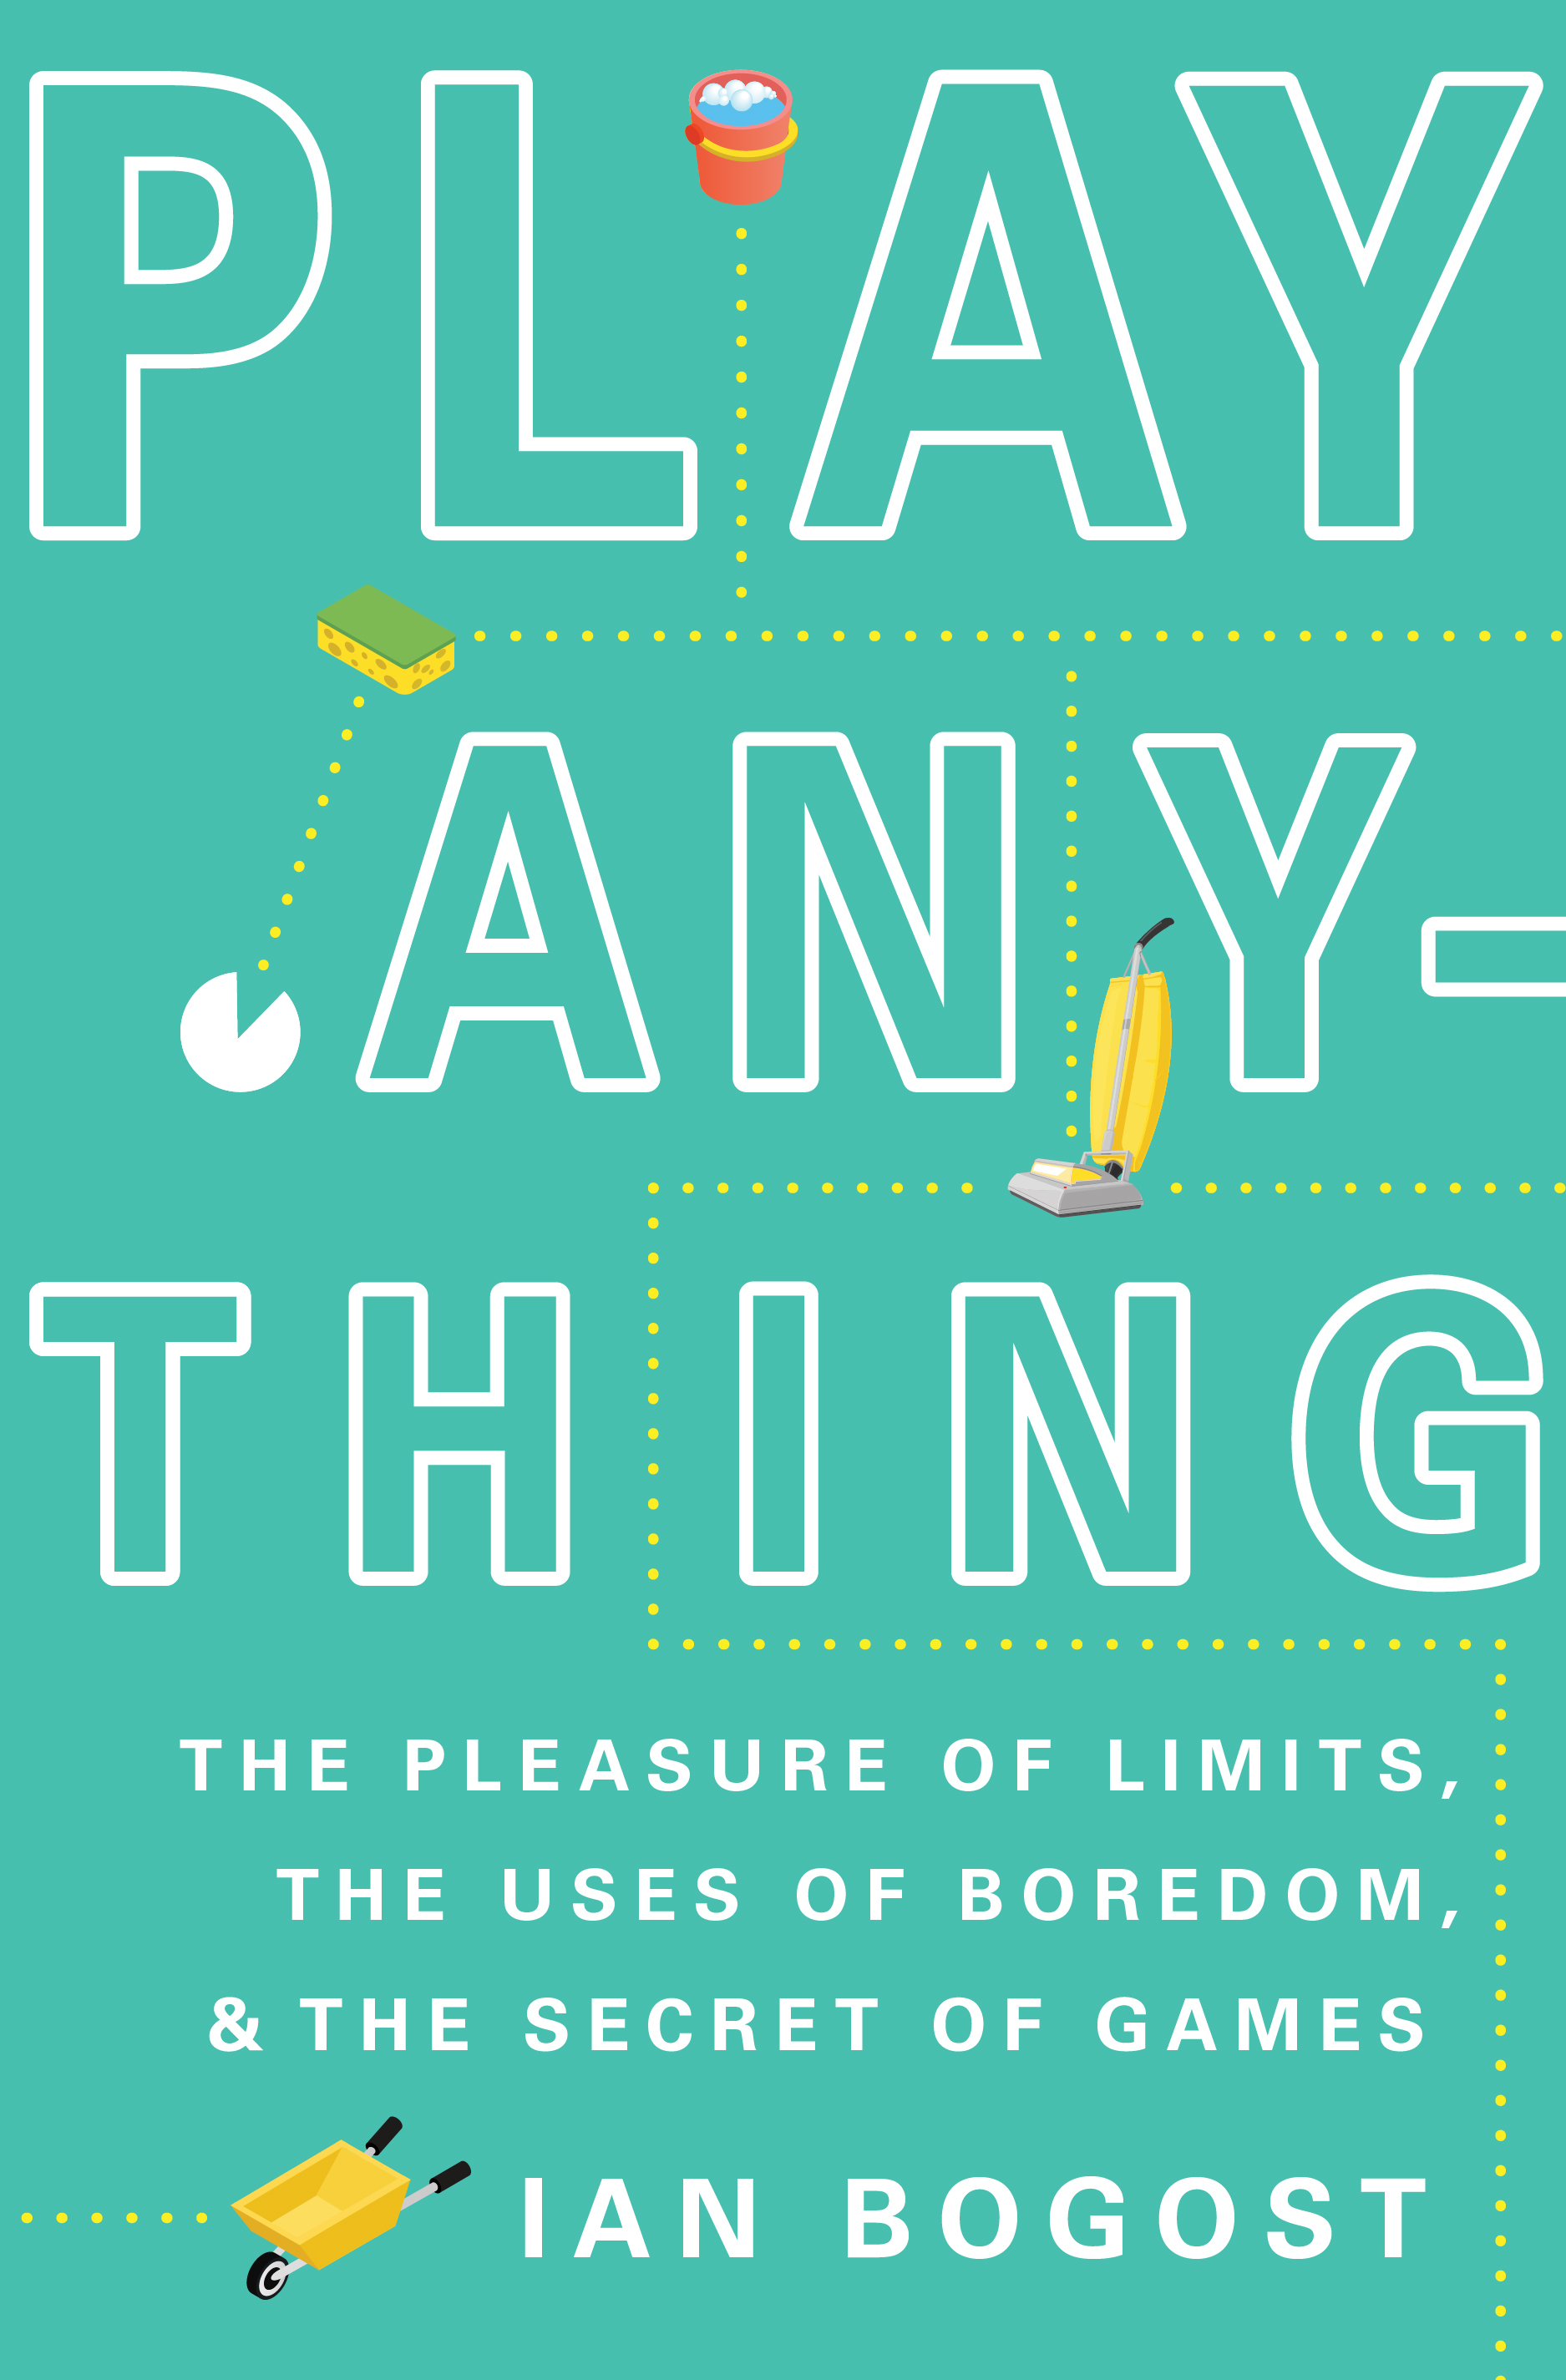 Play Anything by Ian Bogost